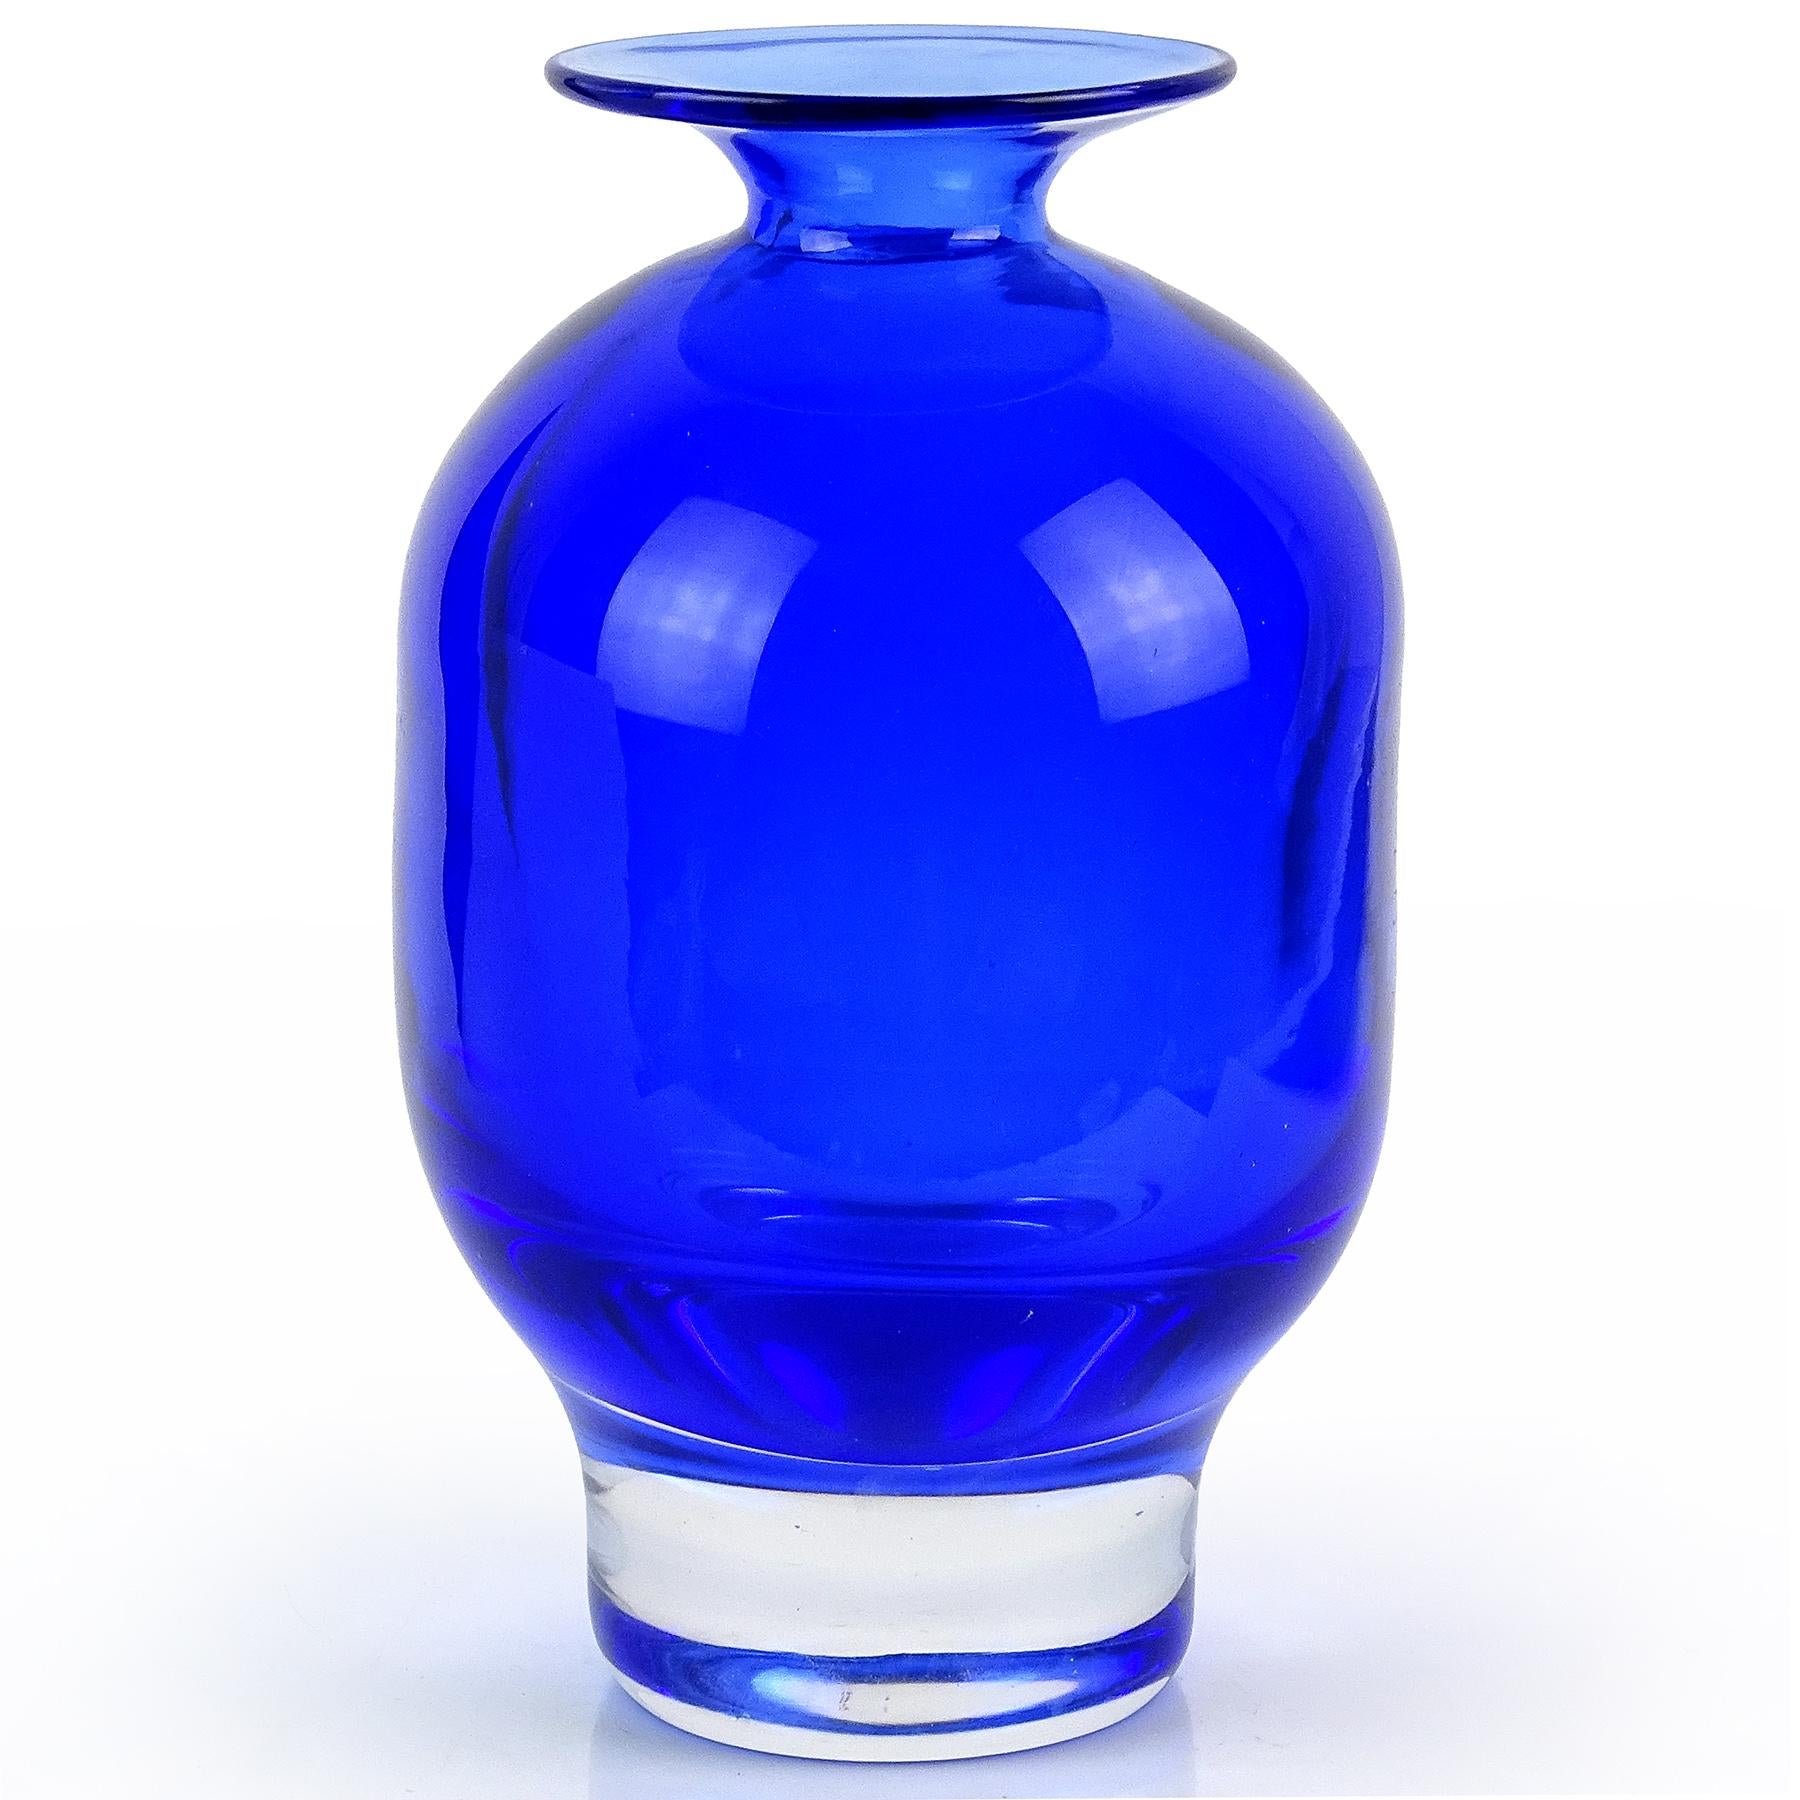 Beautiful vintage Murano hand blown Sommerso cobalt blue in clear glass Italian art glass flower vase. Documented to the designer Antonio da Ros (Italian, 1936-2012) for Vetreria Gino Cenedese. According to the previous owner, the vase is described